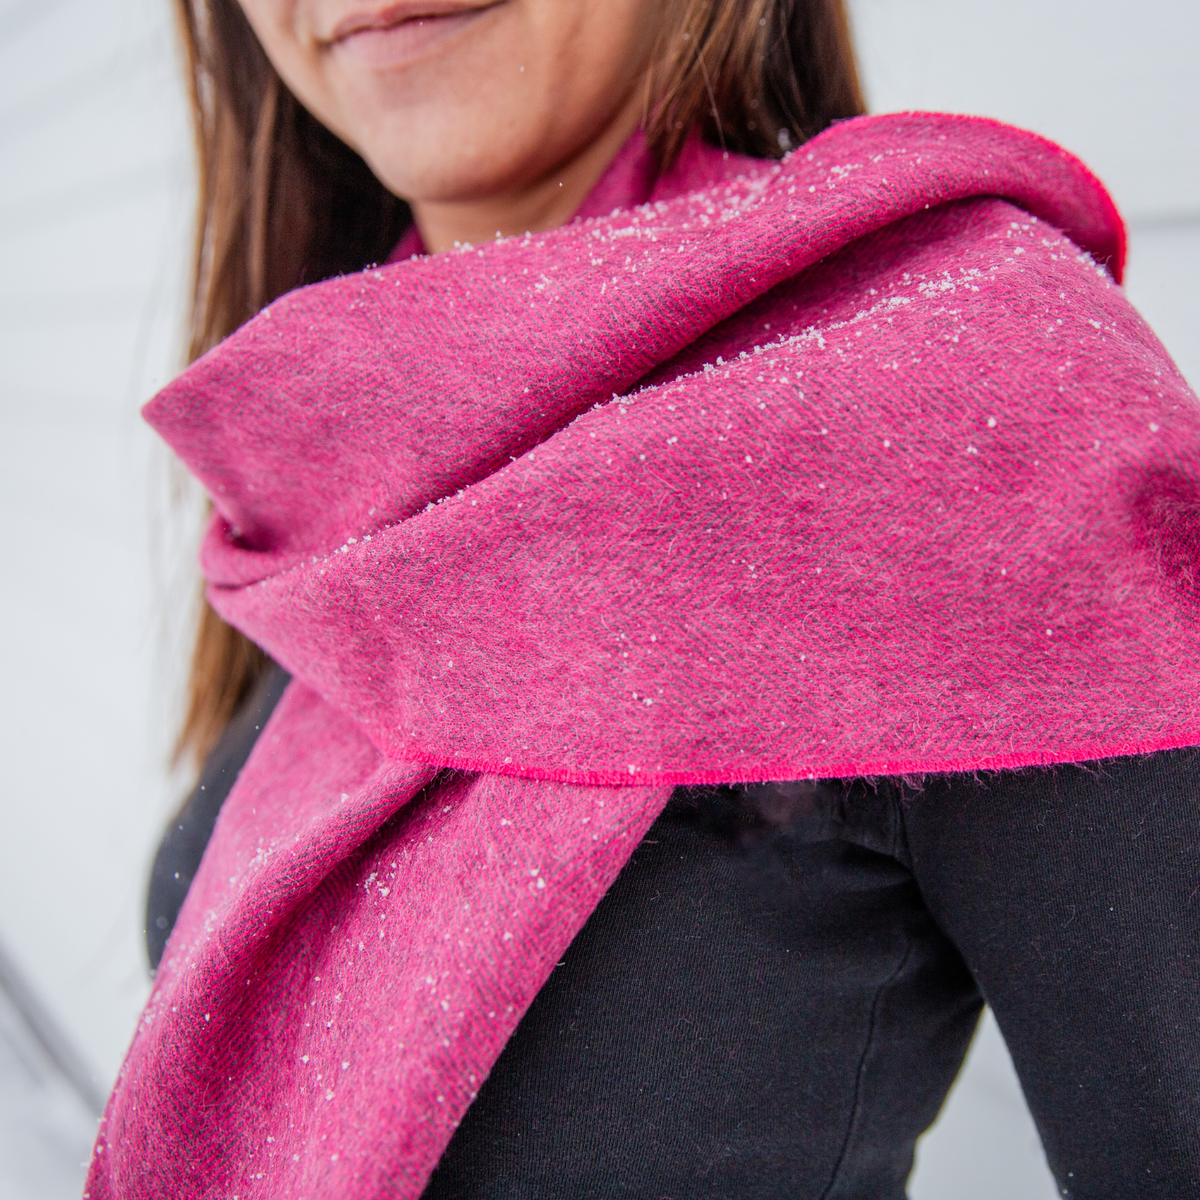 A close up photo of a brown haired woman wearing a black long sleeve shirt and a soft cozy stylish comfortable women&#39;s fashion moisture wicking warm cute lovely herringbone patterned fuchsia pink and gray alpaca wool scarf.